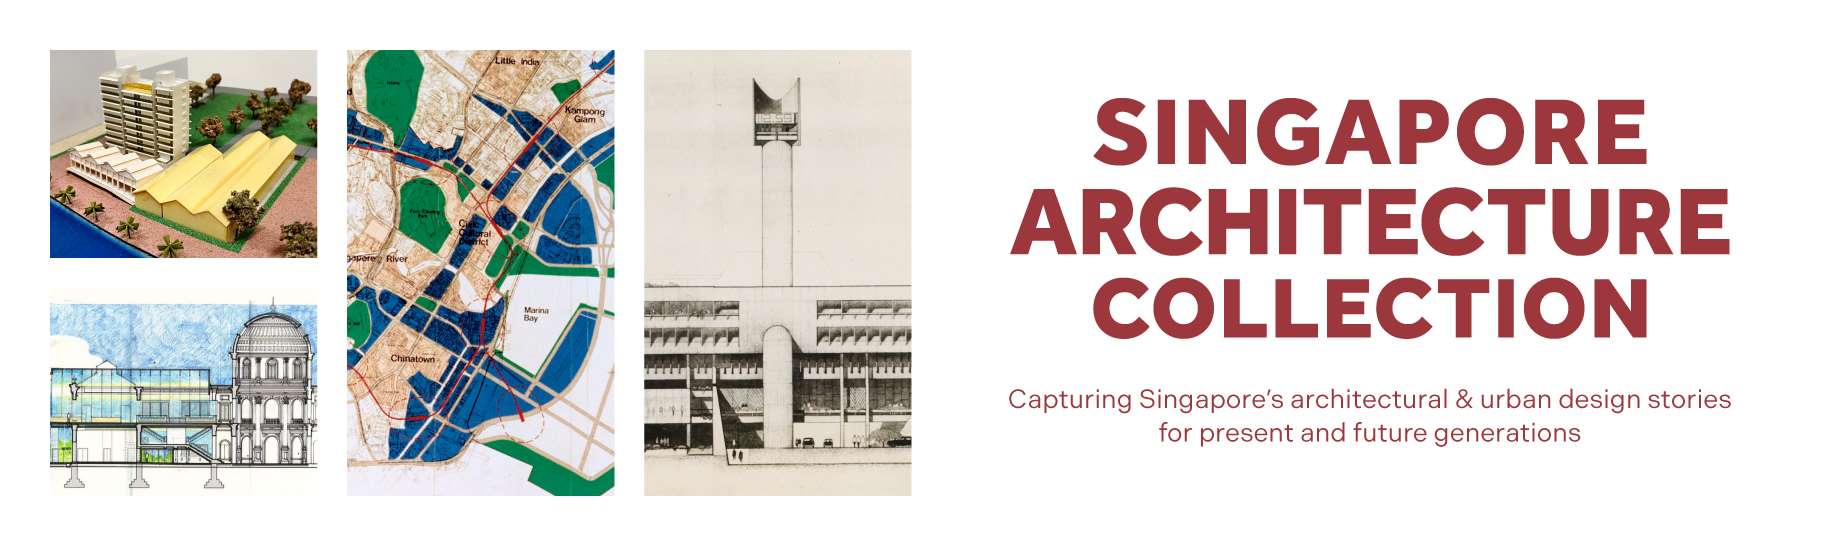 Singapore Architecture Collection banner